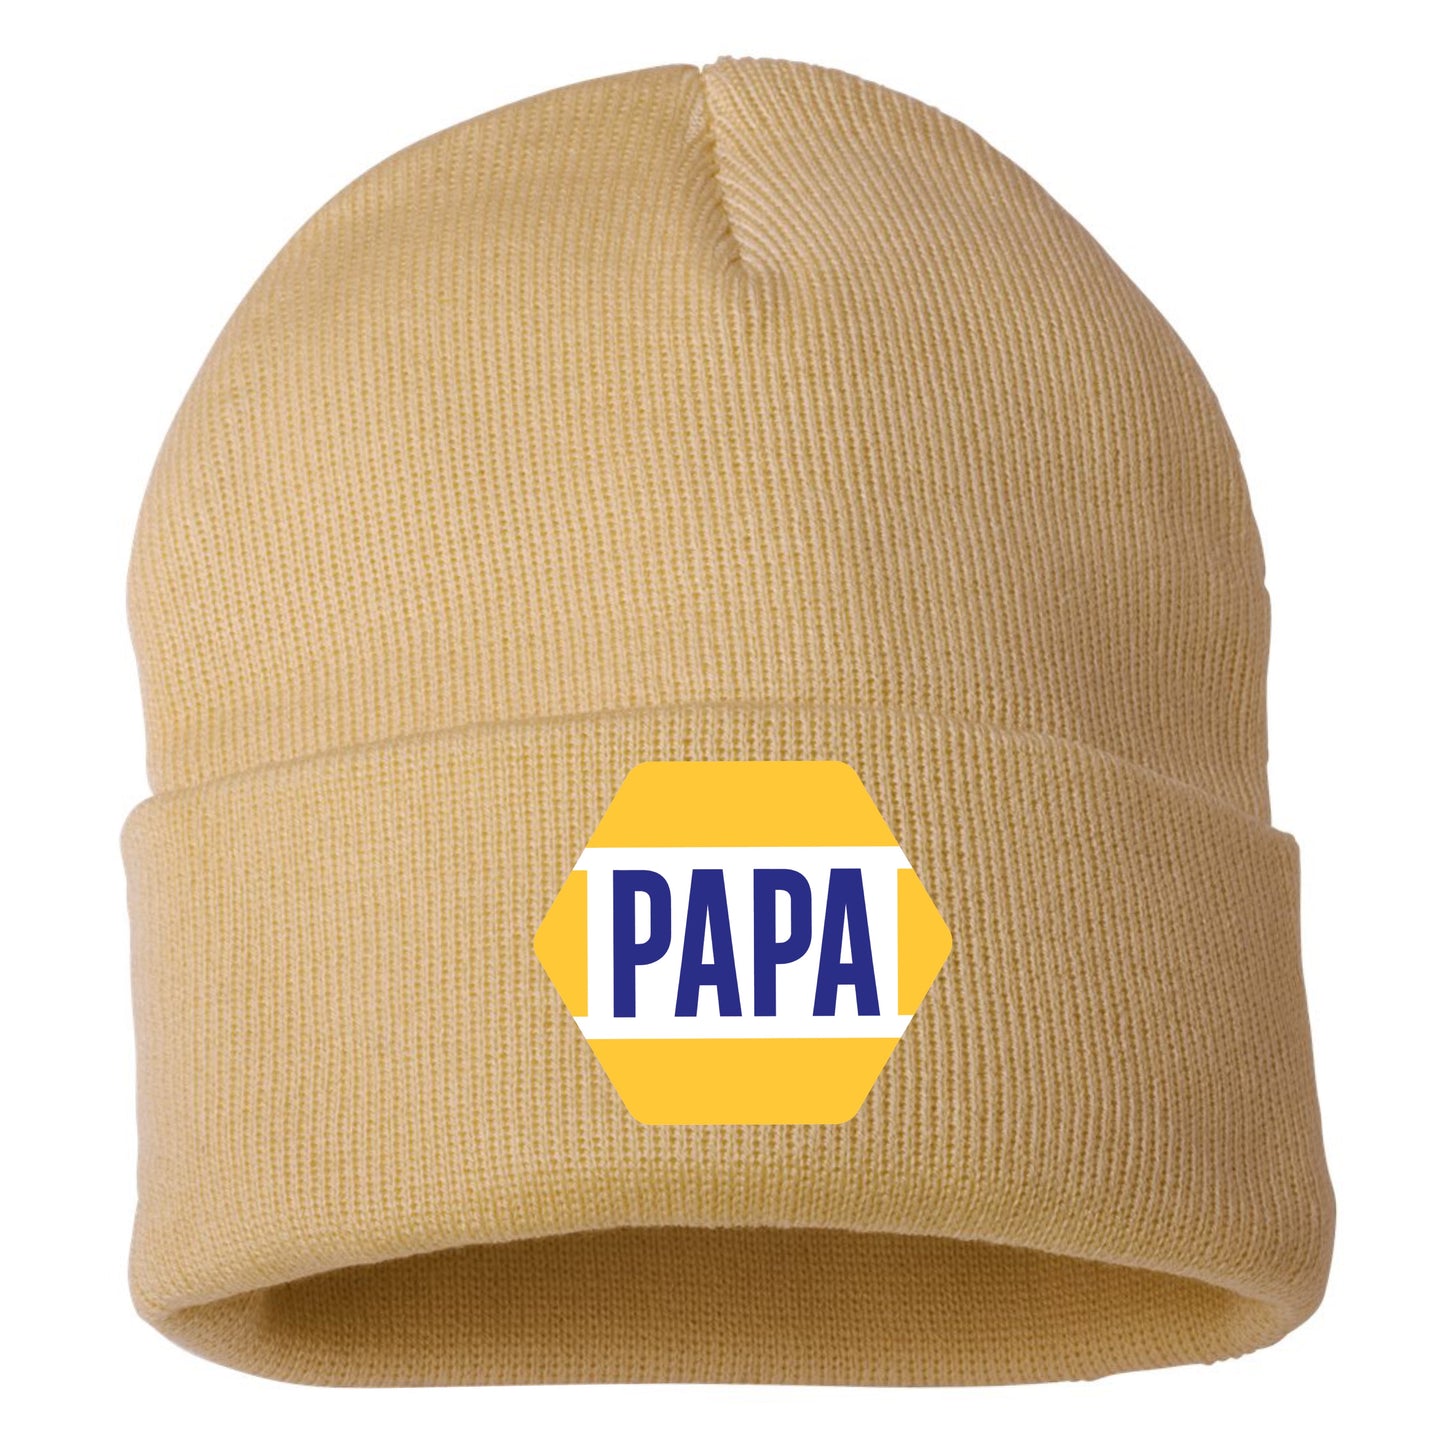 PAPA Know How 3D 12 in Knit Beanie- Camel - Ten Gallon Hat Co.